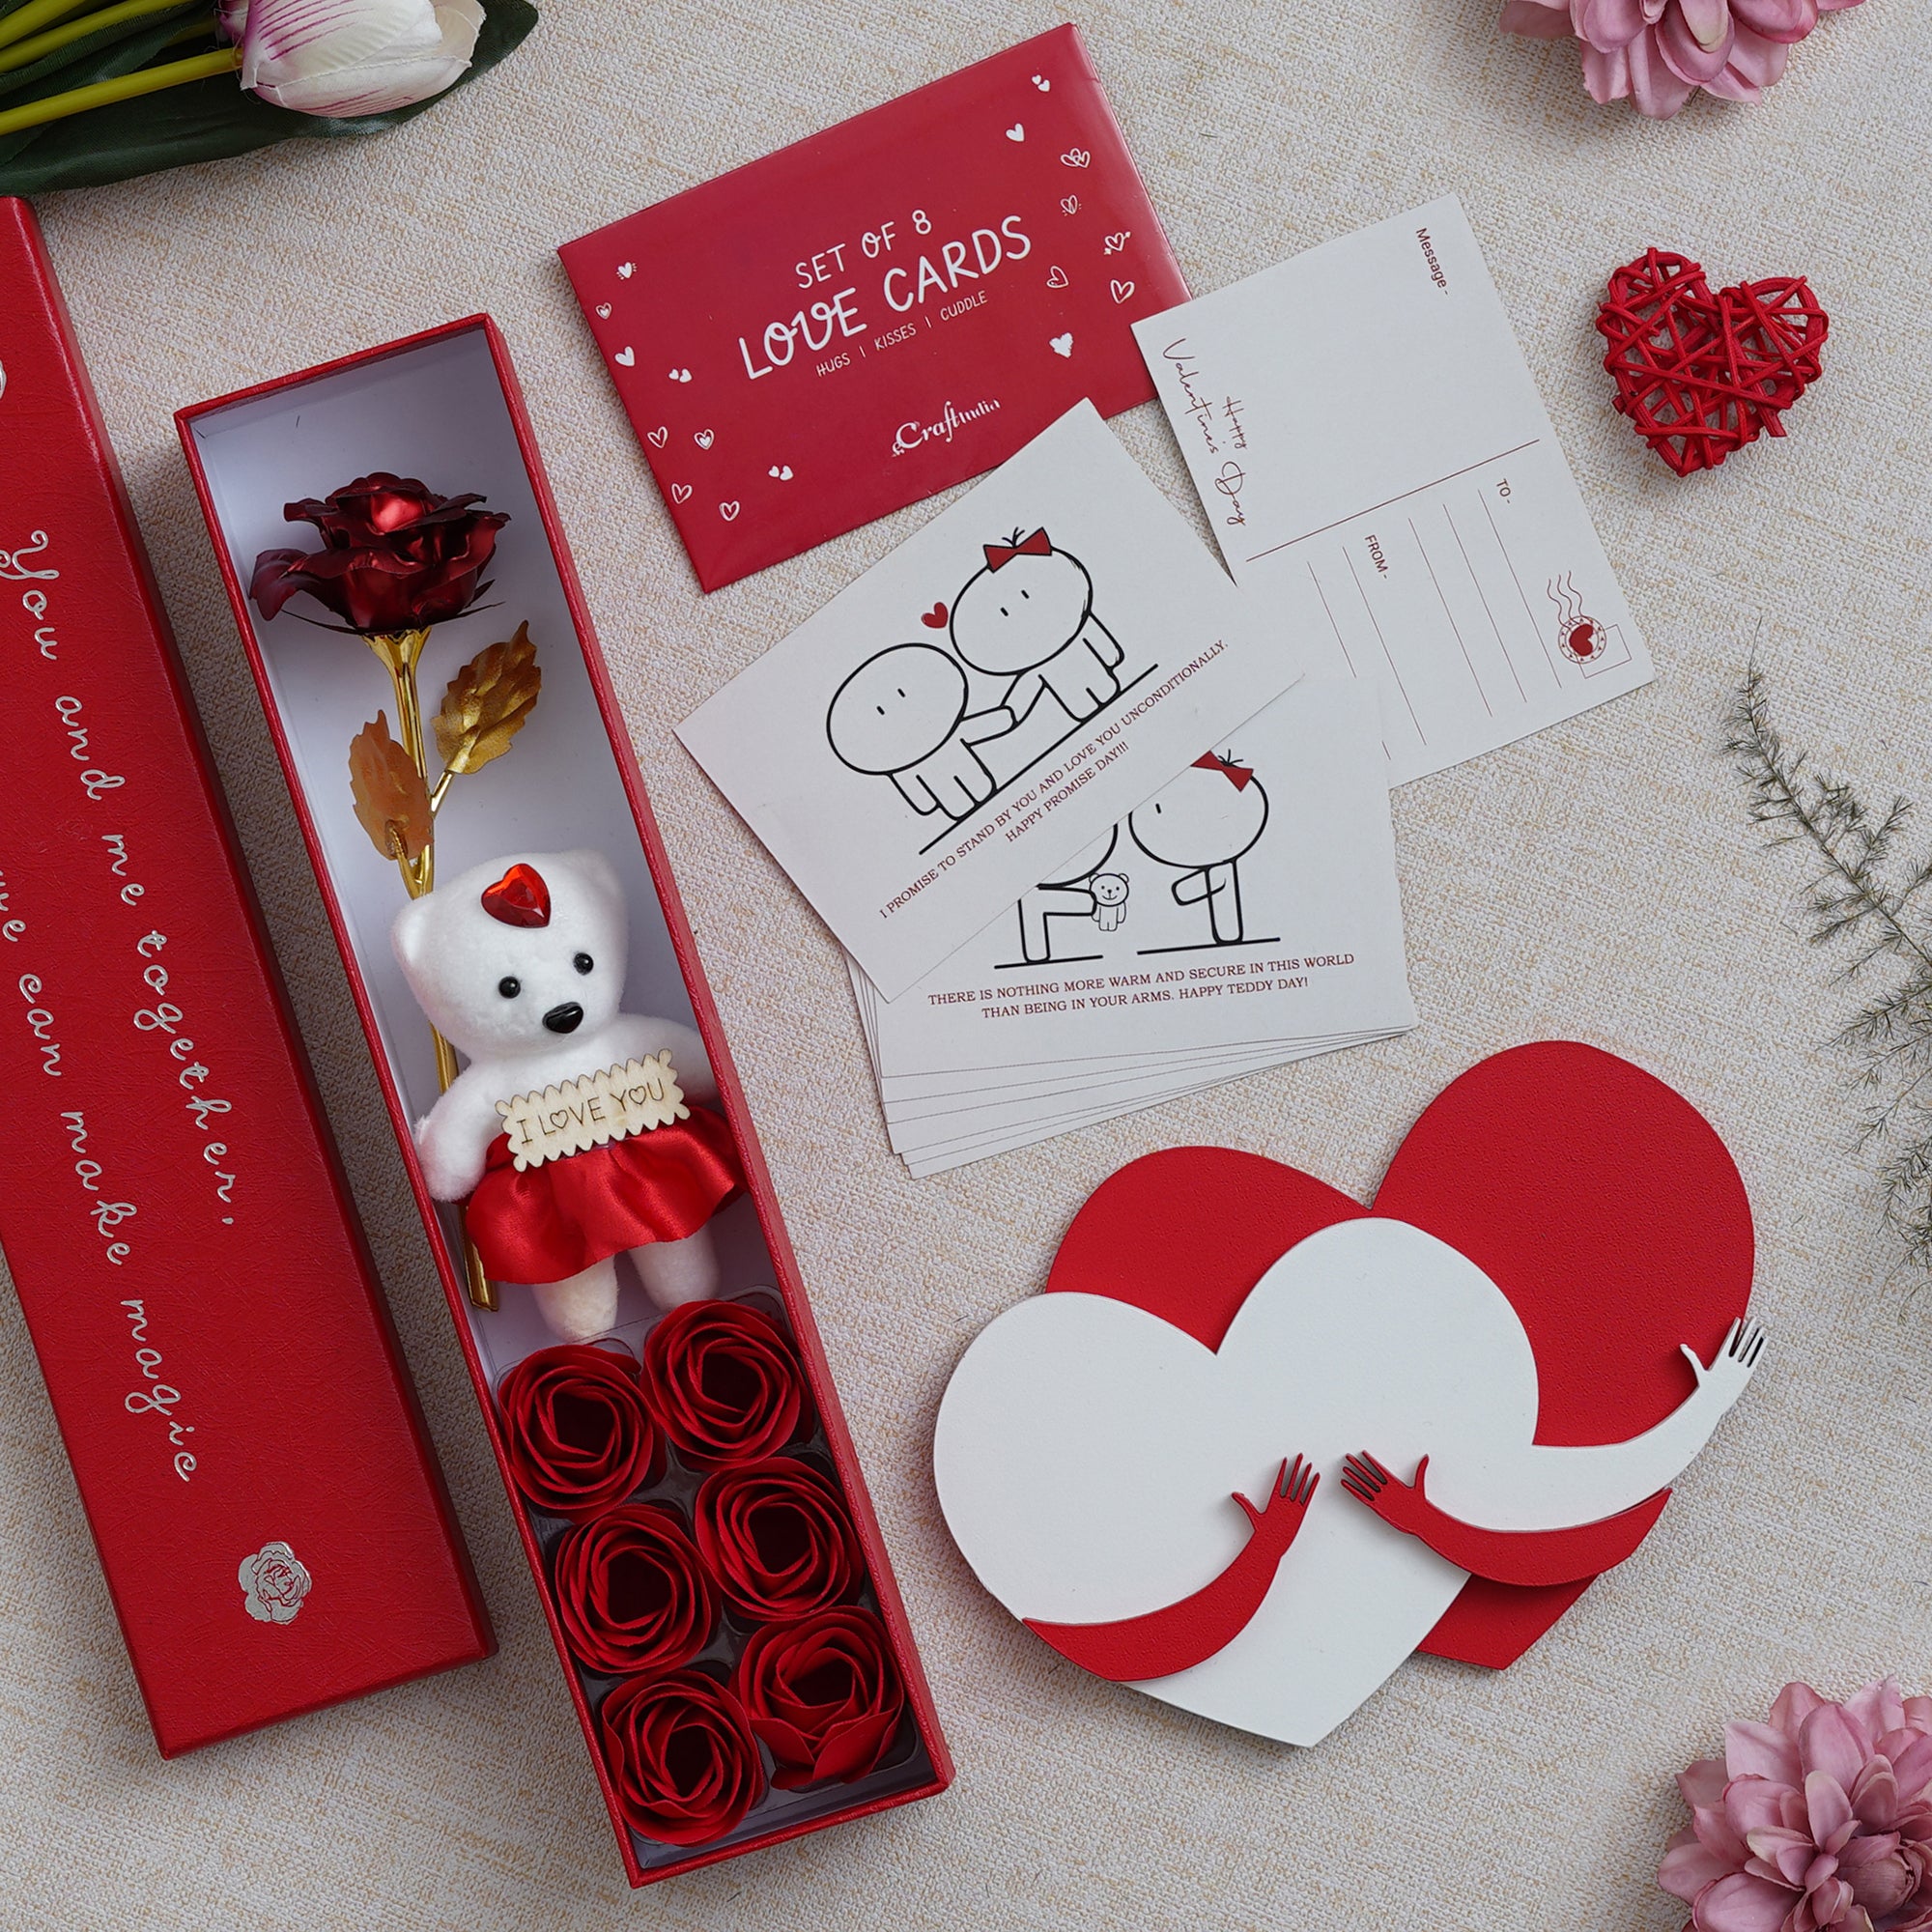 Valentine Combo of Pack of 8 Love Gift Cards, Red Gift Box with Teddy & Roses, Red and White Heart Hugging Each Other Gift Set